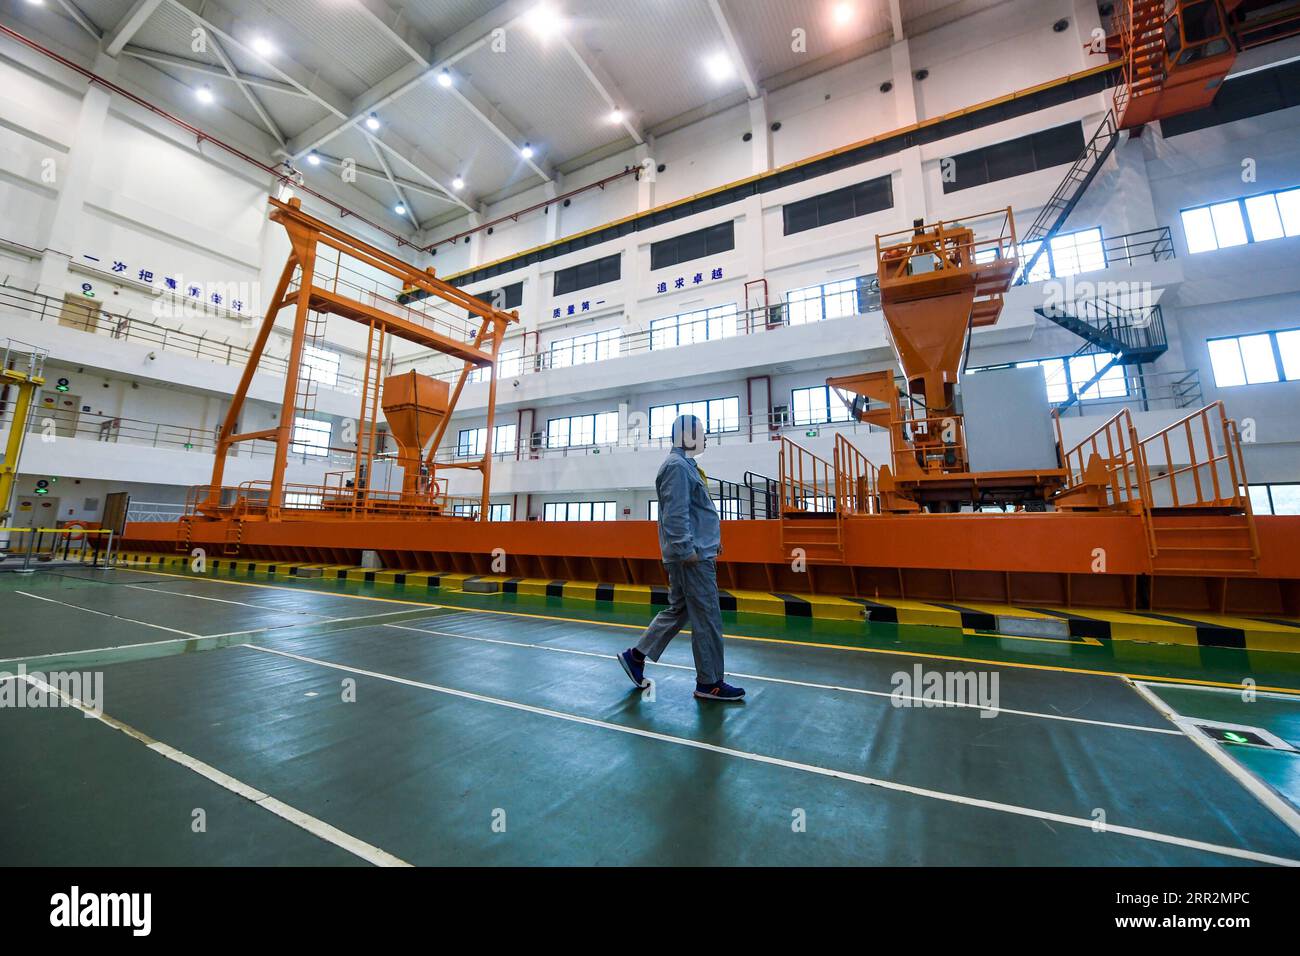 201014 -- SHENZHEN, Oct. 14, 2020 -- Qiao Sukai walks past a simulated refueling pool at a training center in Shenzhen, south China s Guangdong Province, April 12, 2019. Every 18 months, the Dayawan Nuclear Power Plant has to undergo a fuel assemblies replacement, which is one of the most important moments for the nuclear power plant. Dozens of engineers are divided into four shifts and operate the equipment day and night when the reactor is shut down. Their leader, Qiao Sukai, has been dealing with nuclear fuel since July 1993 when the nuclear fuel assembly of Dayawan Nuclear Power Plant arri Stock Photo